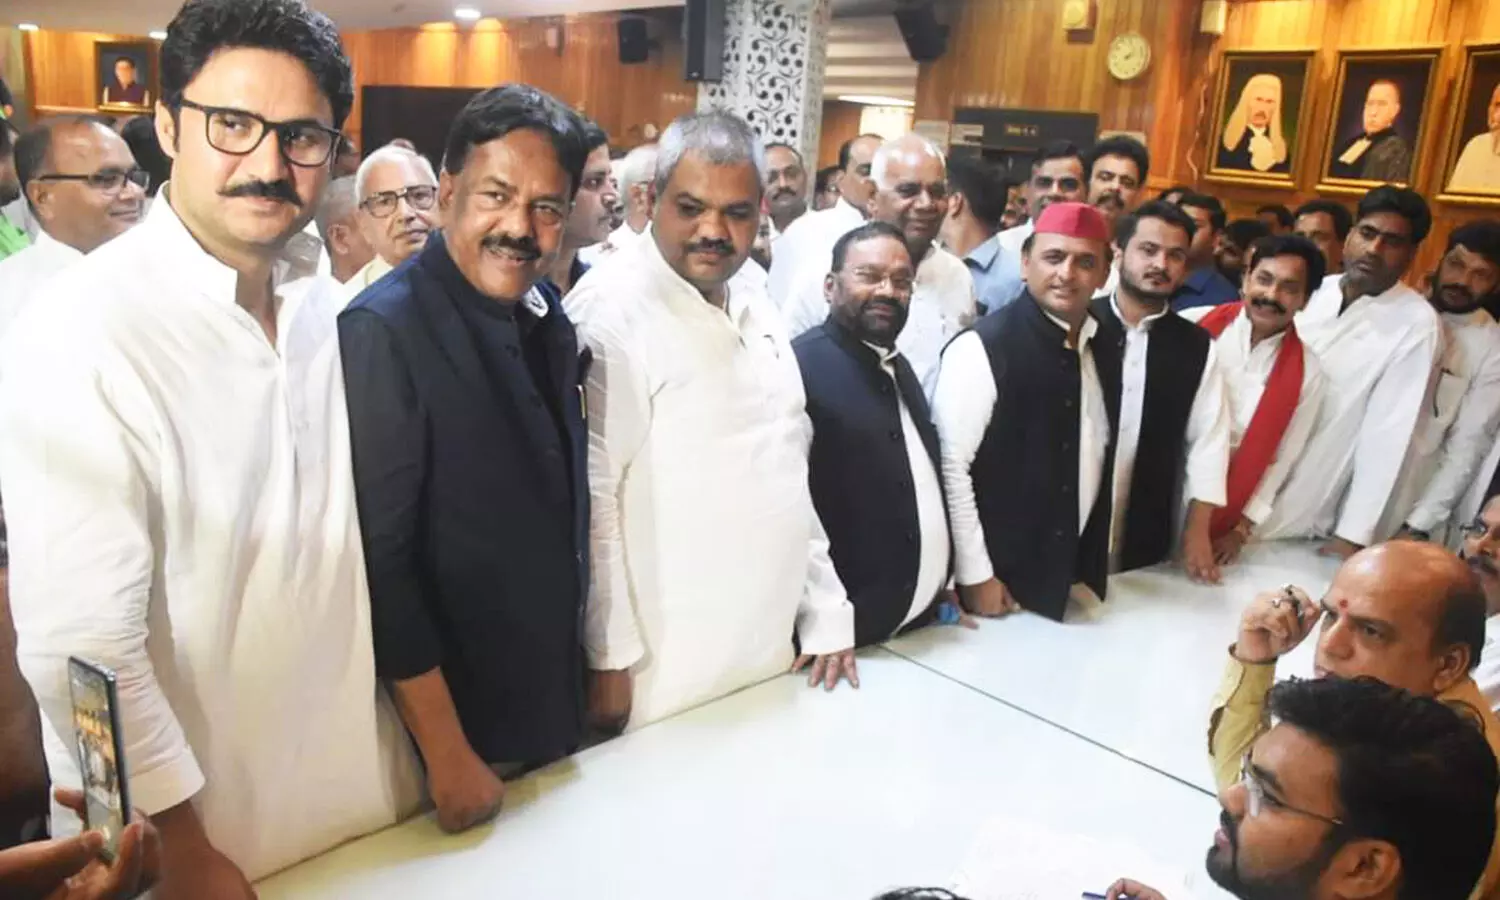 Akhilesh Yadav with SP candidates arrived to file nomination for UP MLC elections